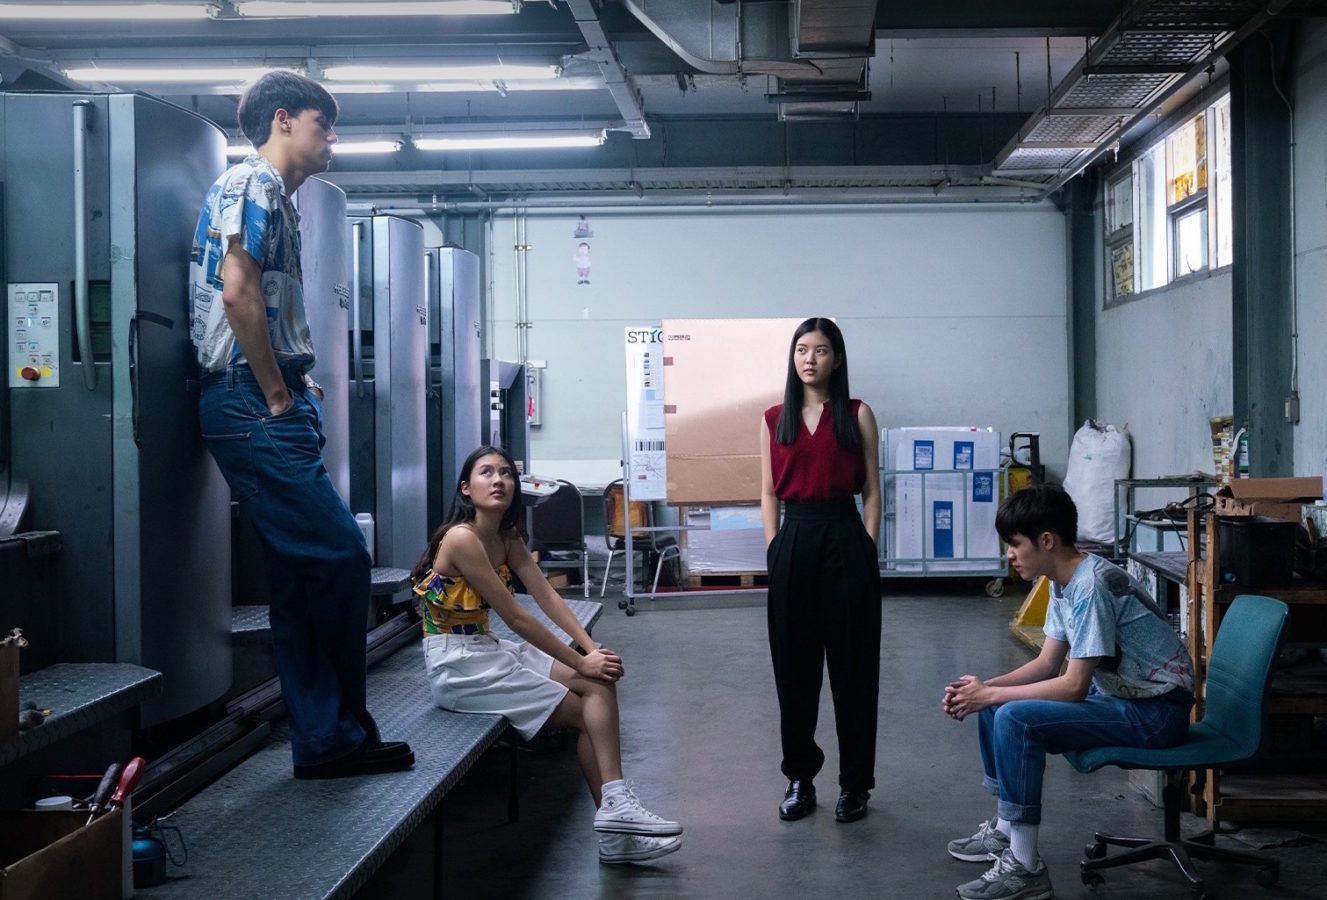 Watch this: a good chat with the cast of ‘Bad Genius: The Series’